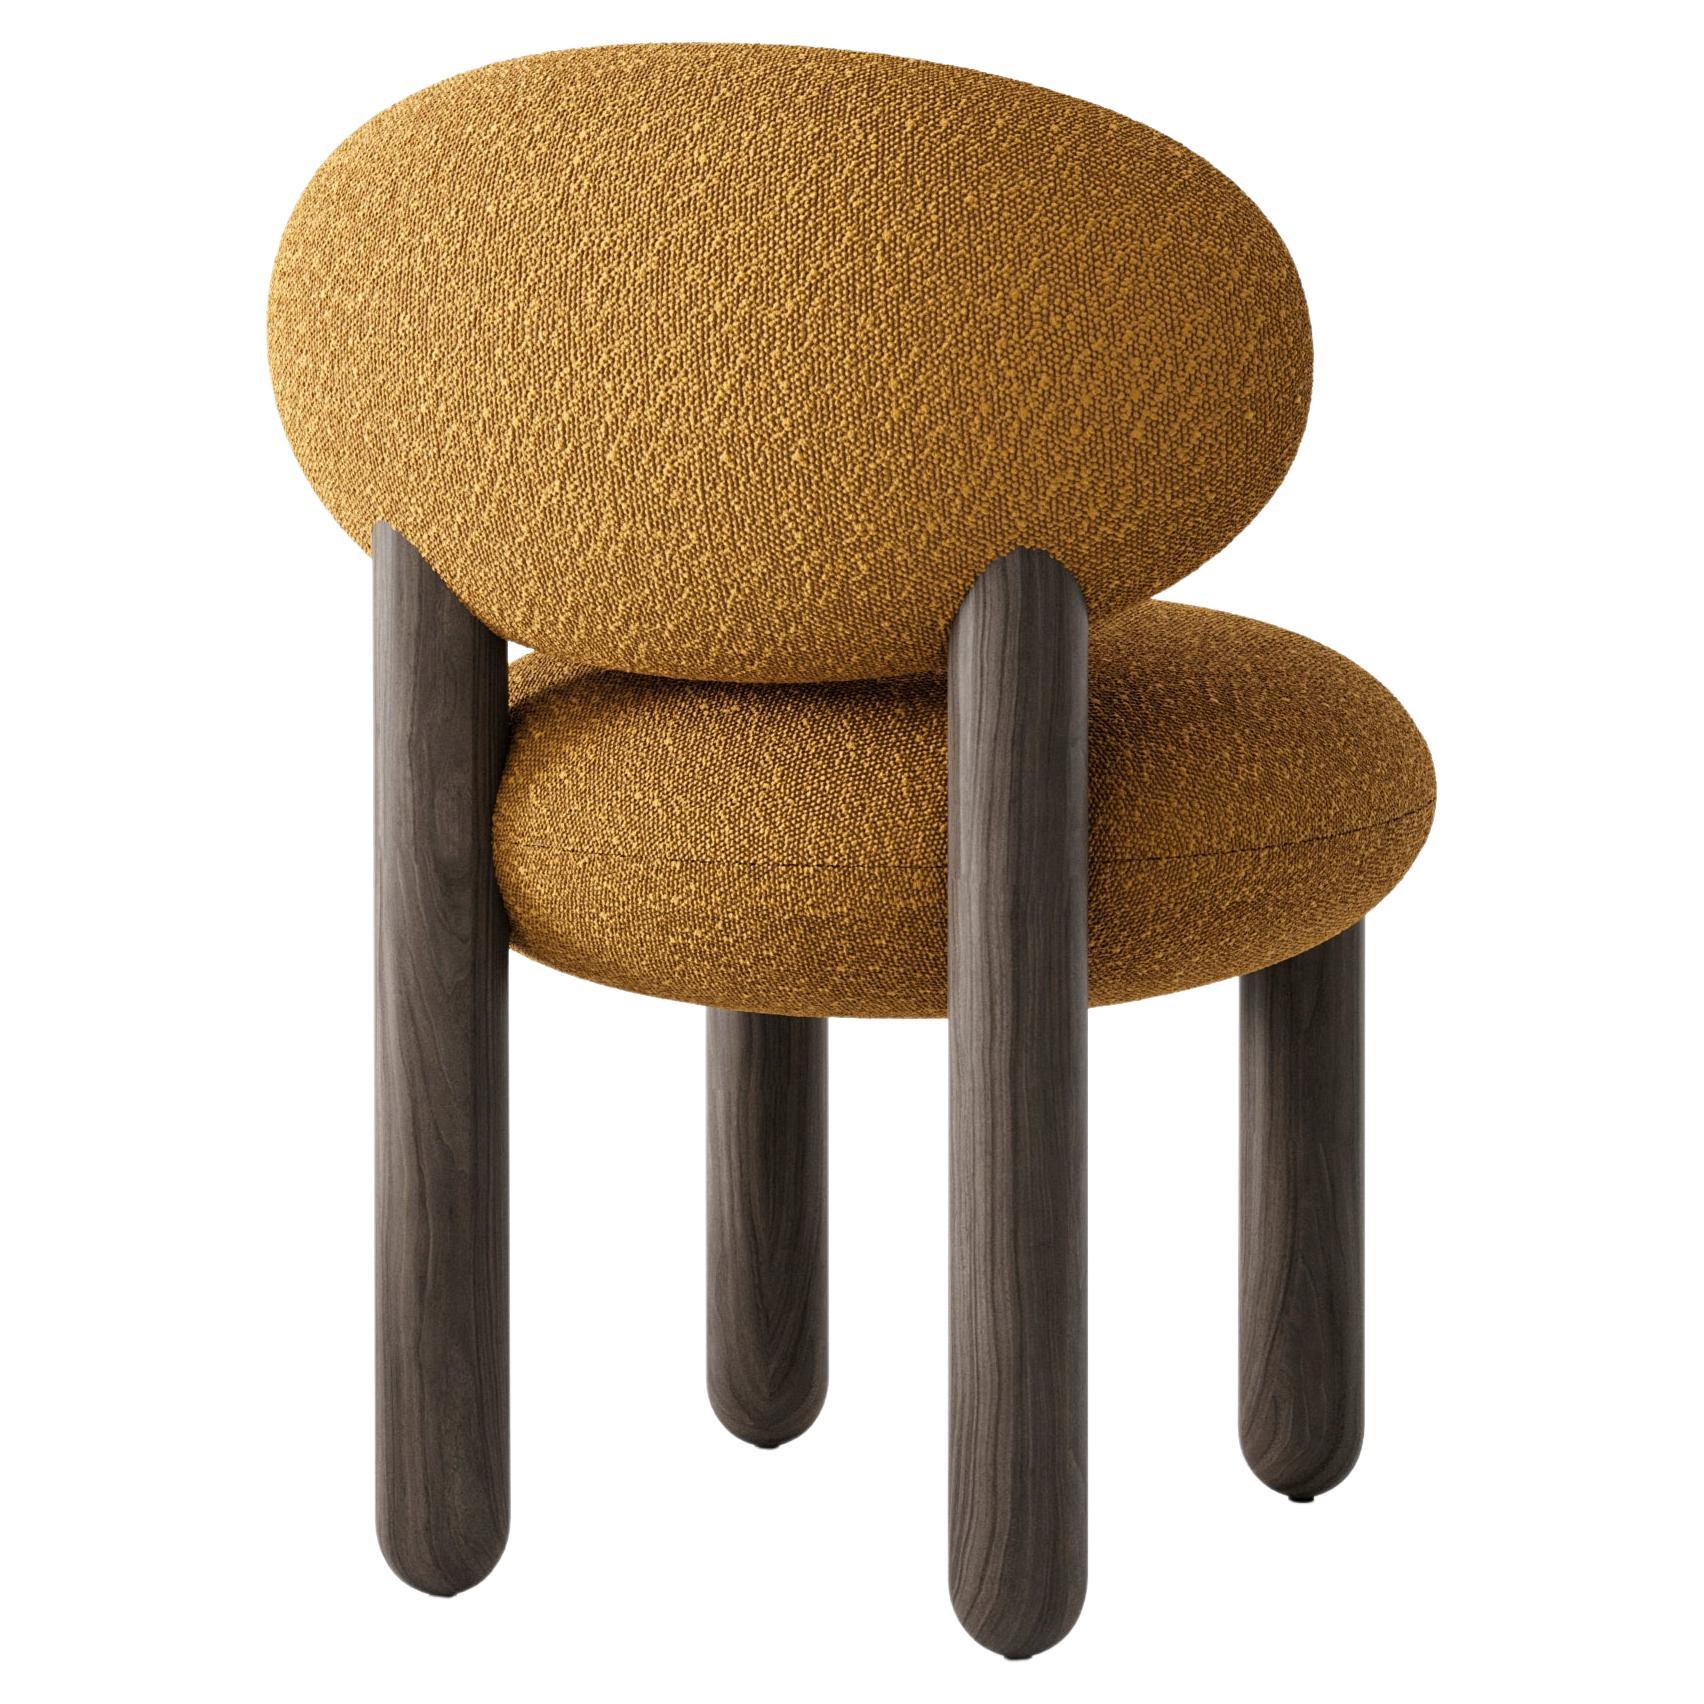 Modern Dining Chair Flock CS2 with Wooden Legs in Various Fabrics by Noom